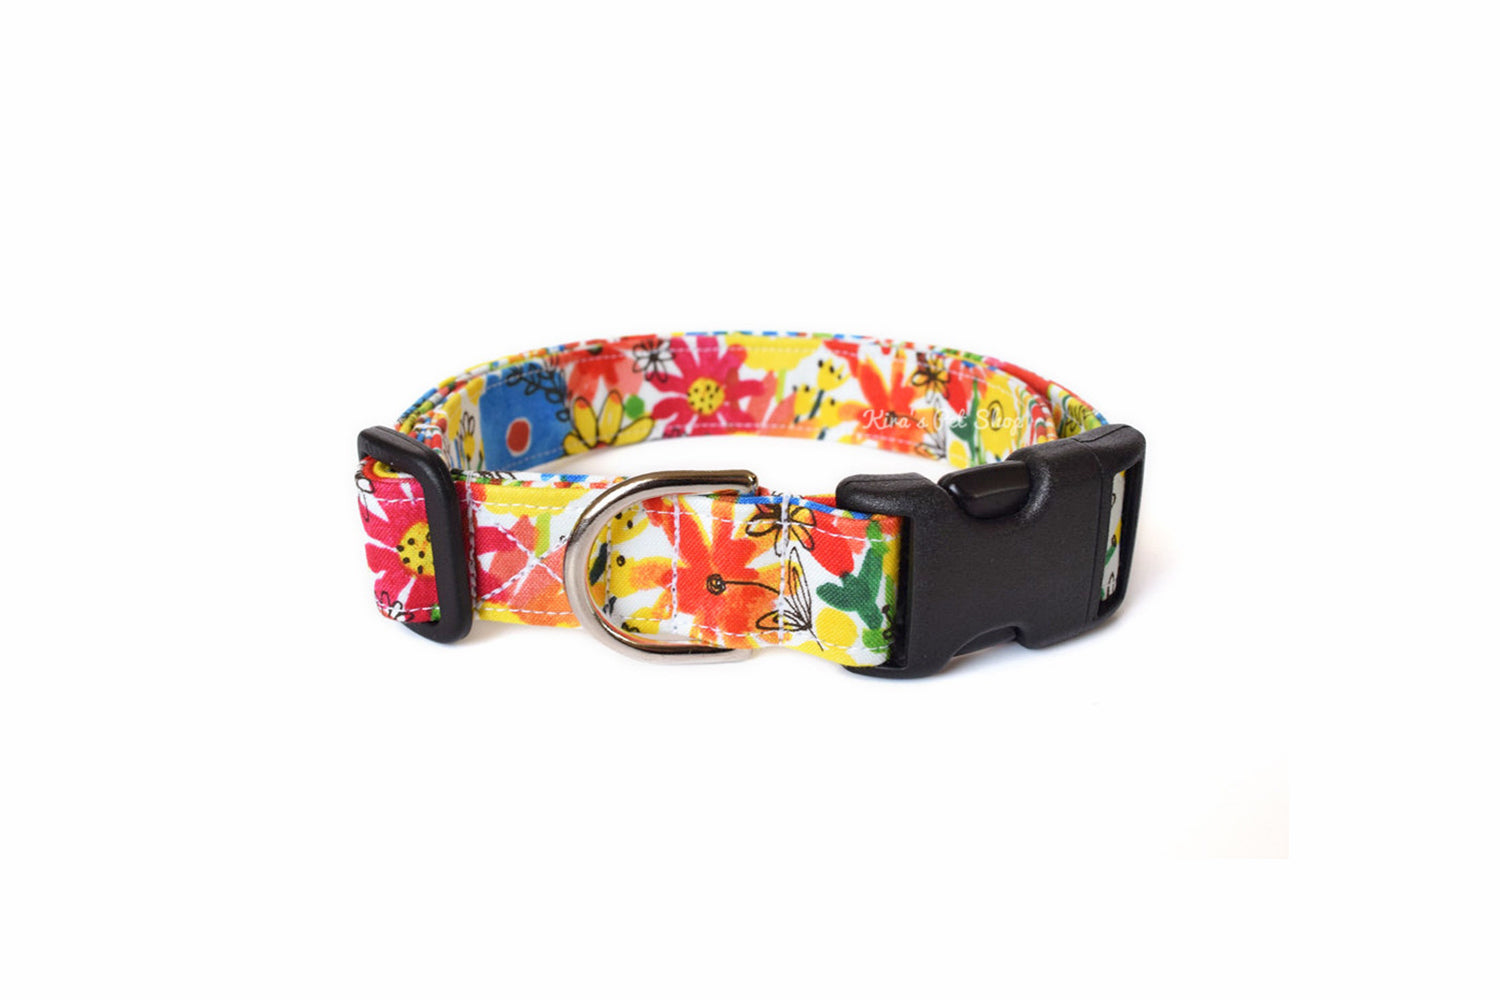 Multicolor Painted Floral Dog Collar - Handmade by Kira's Pet Shop